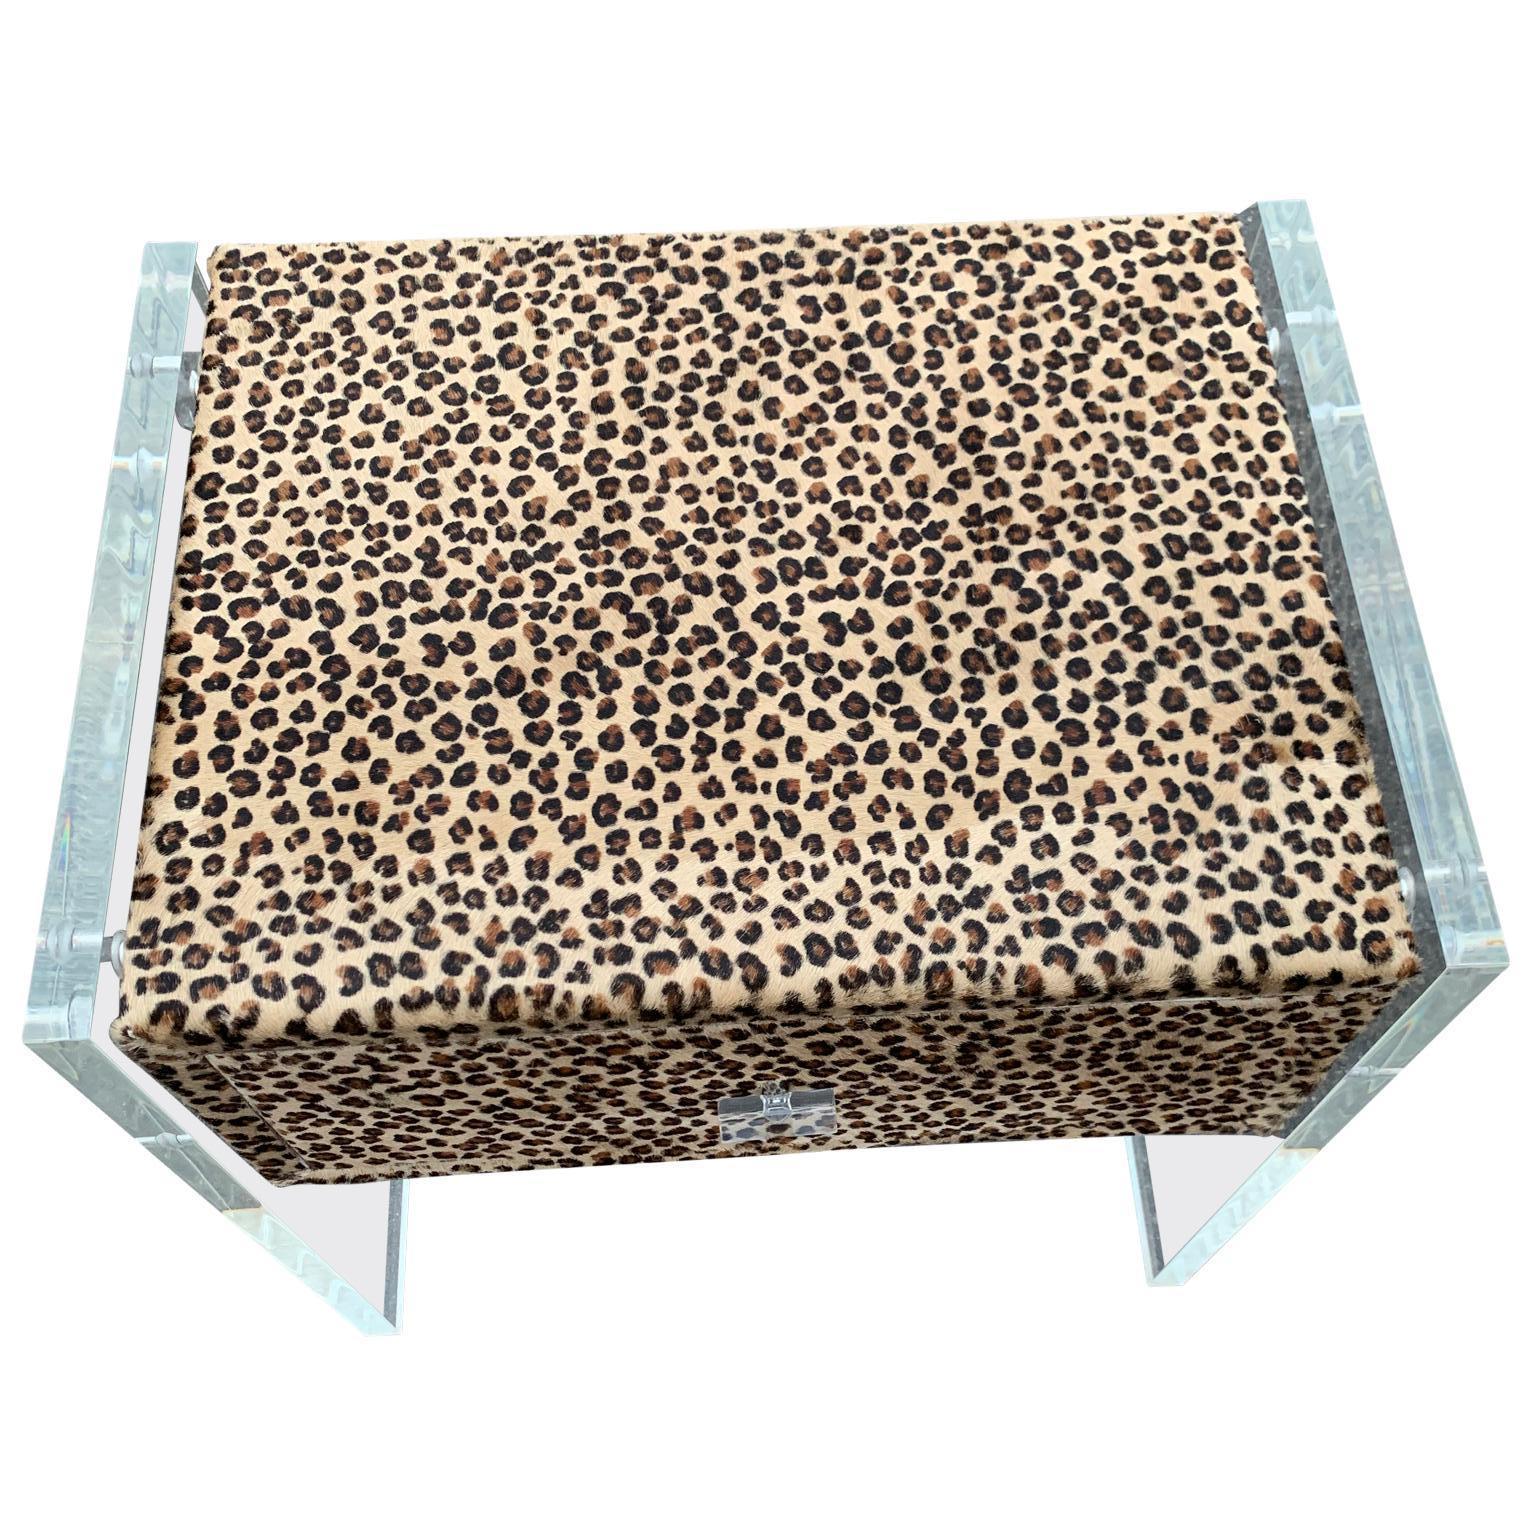 Pair of Faux Cheetah Skin Upholstered Nightstands with Lucite Side Panels (Tierleder)